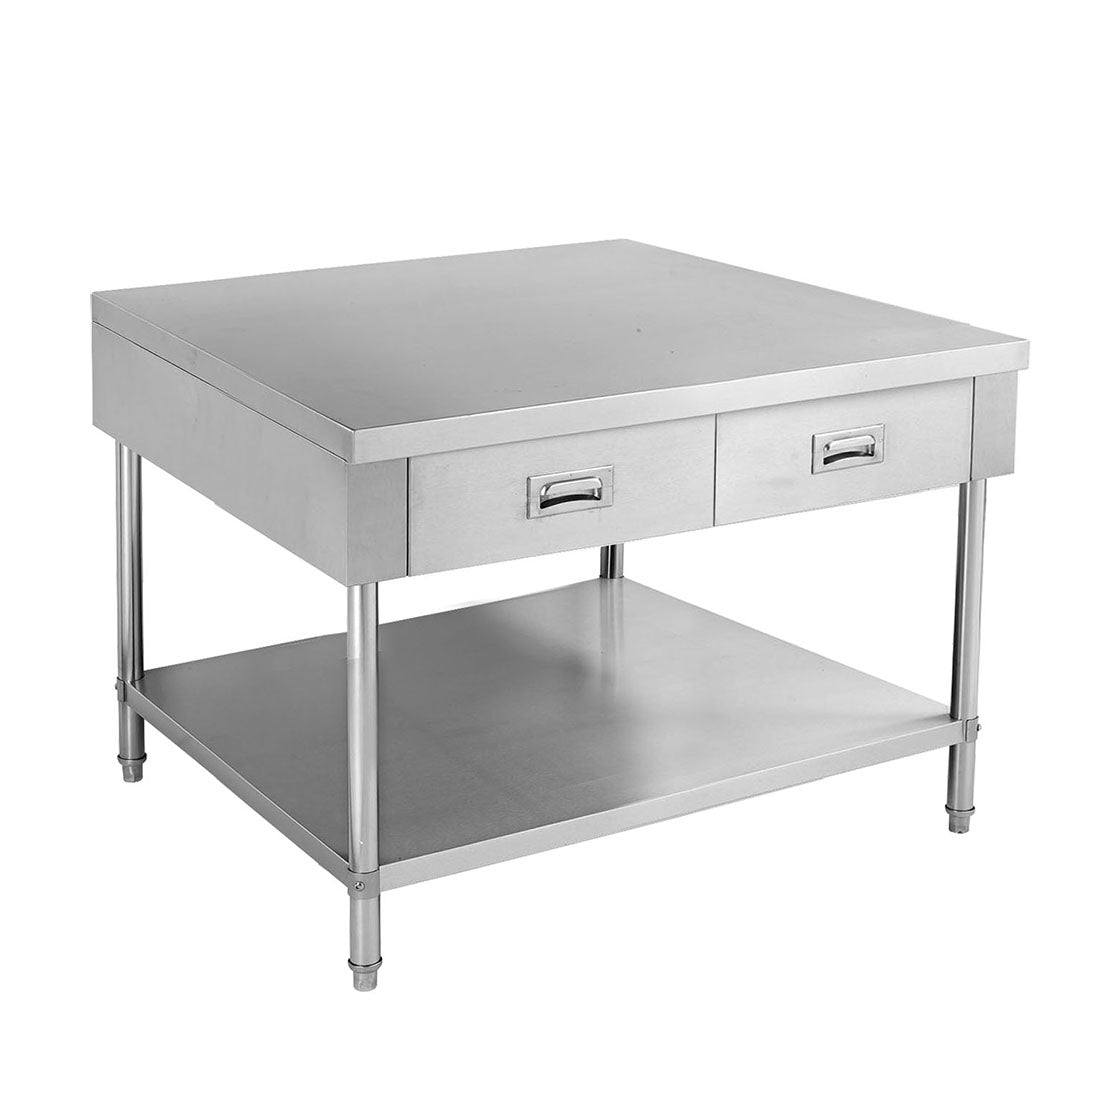 SWBD-6-0900 Work bench with 2 Drawers and Undershelf